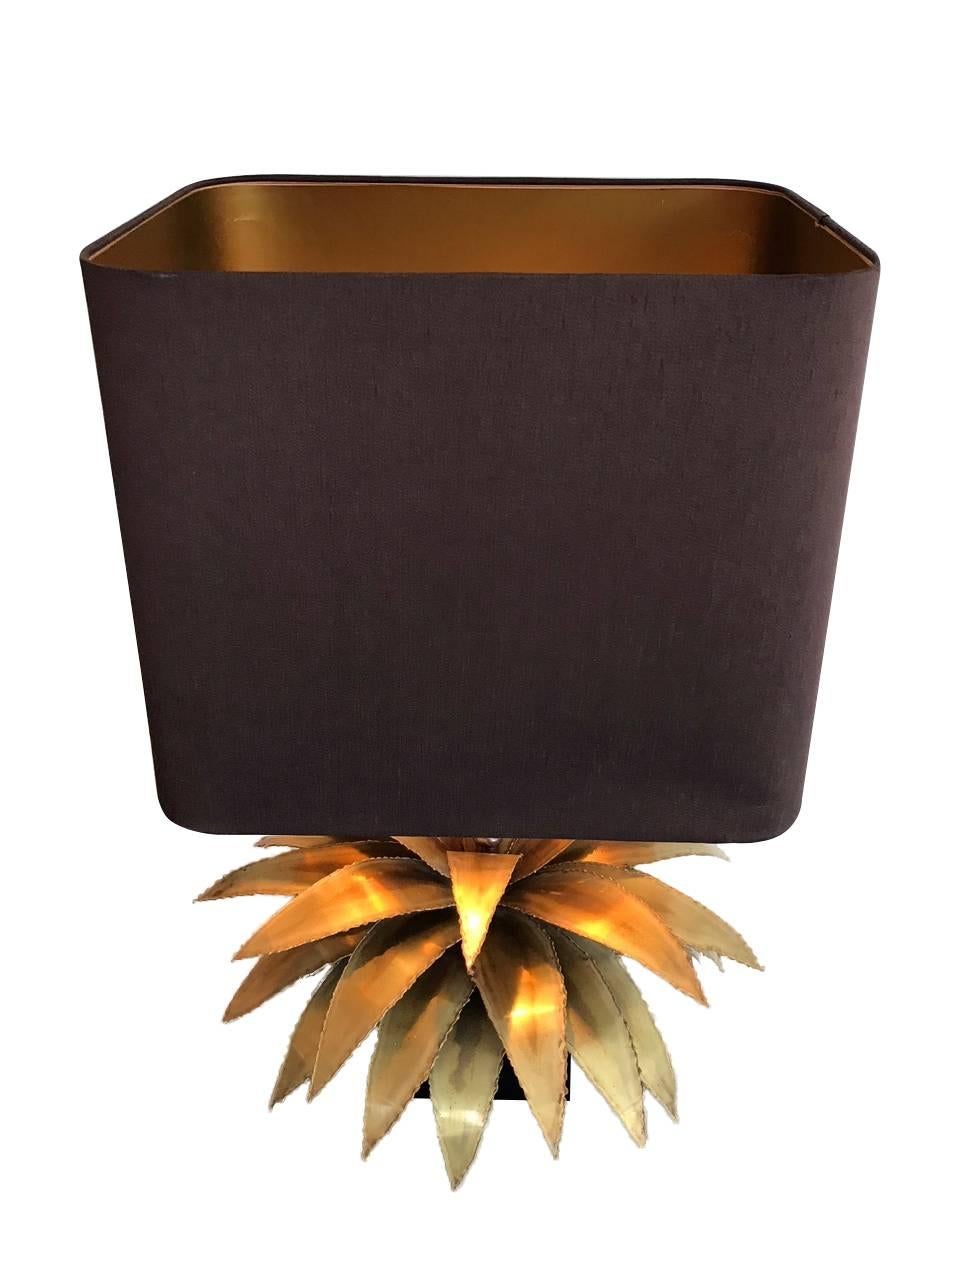 A lovely Maison Jansen brass palm tree table lamp in black lacquer base, with original square brown shade with gold lining.